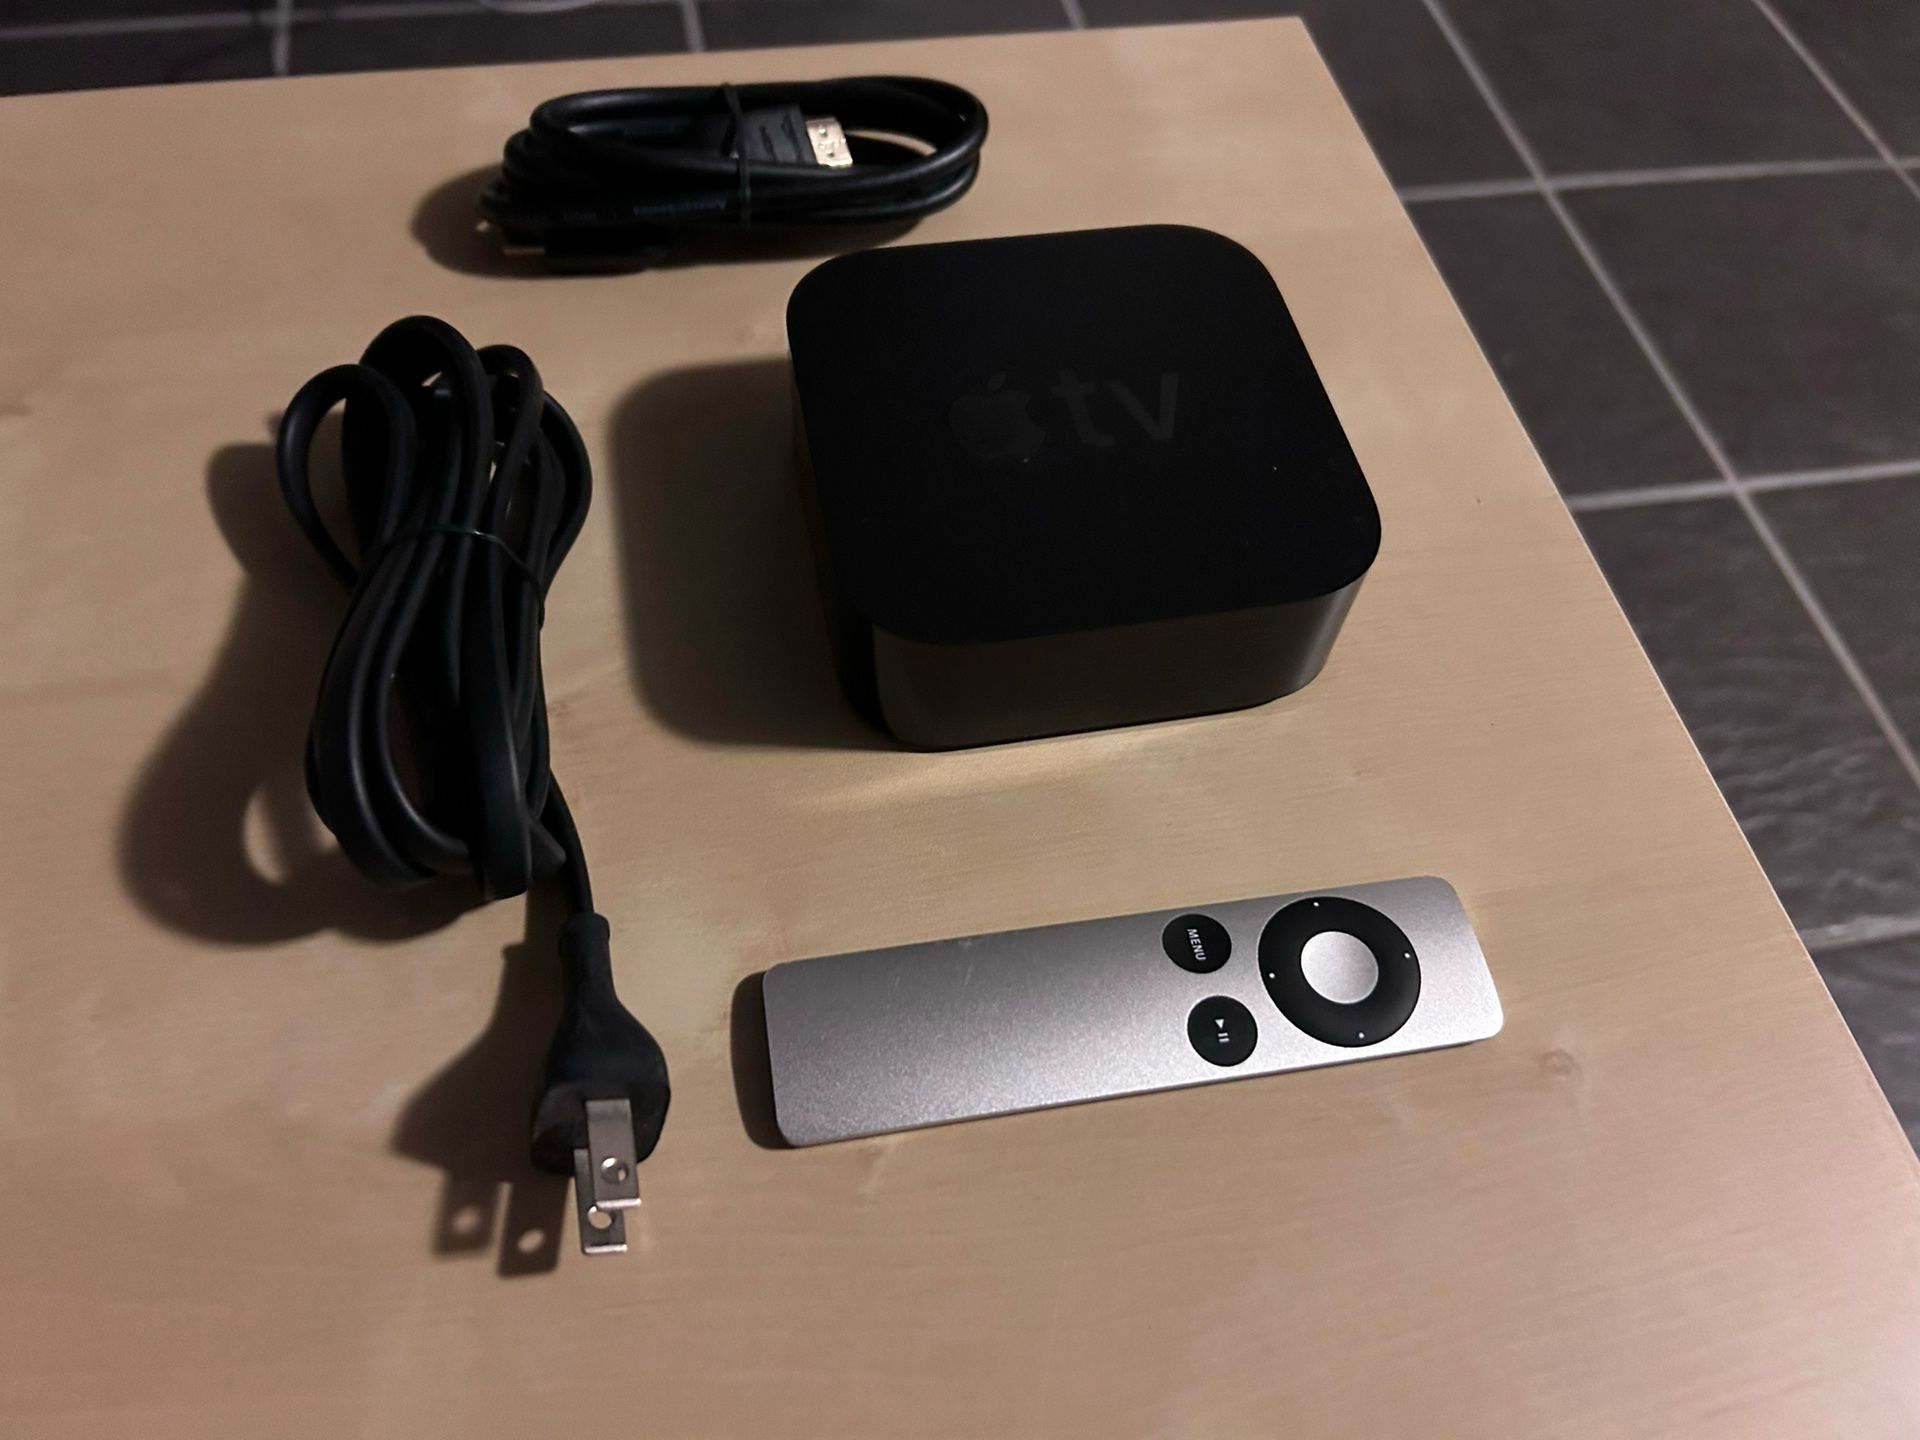 Apple TV 4K With Remote